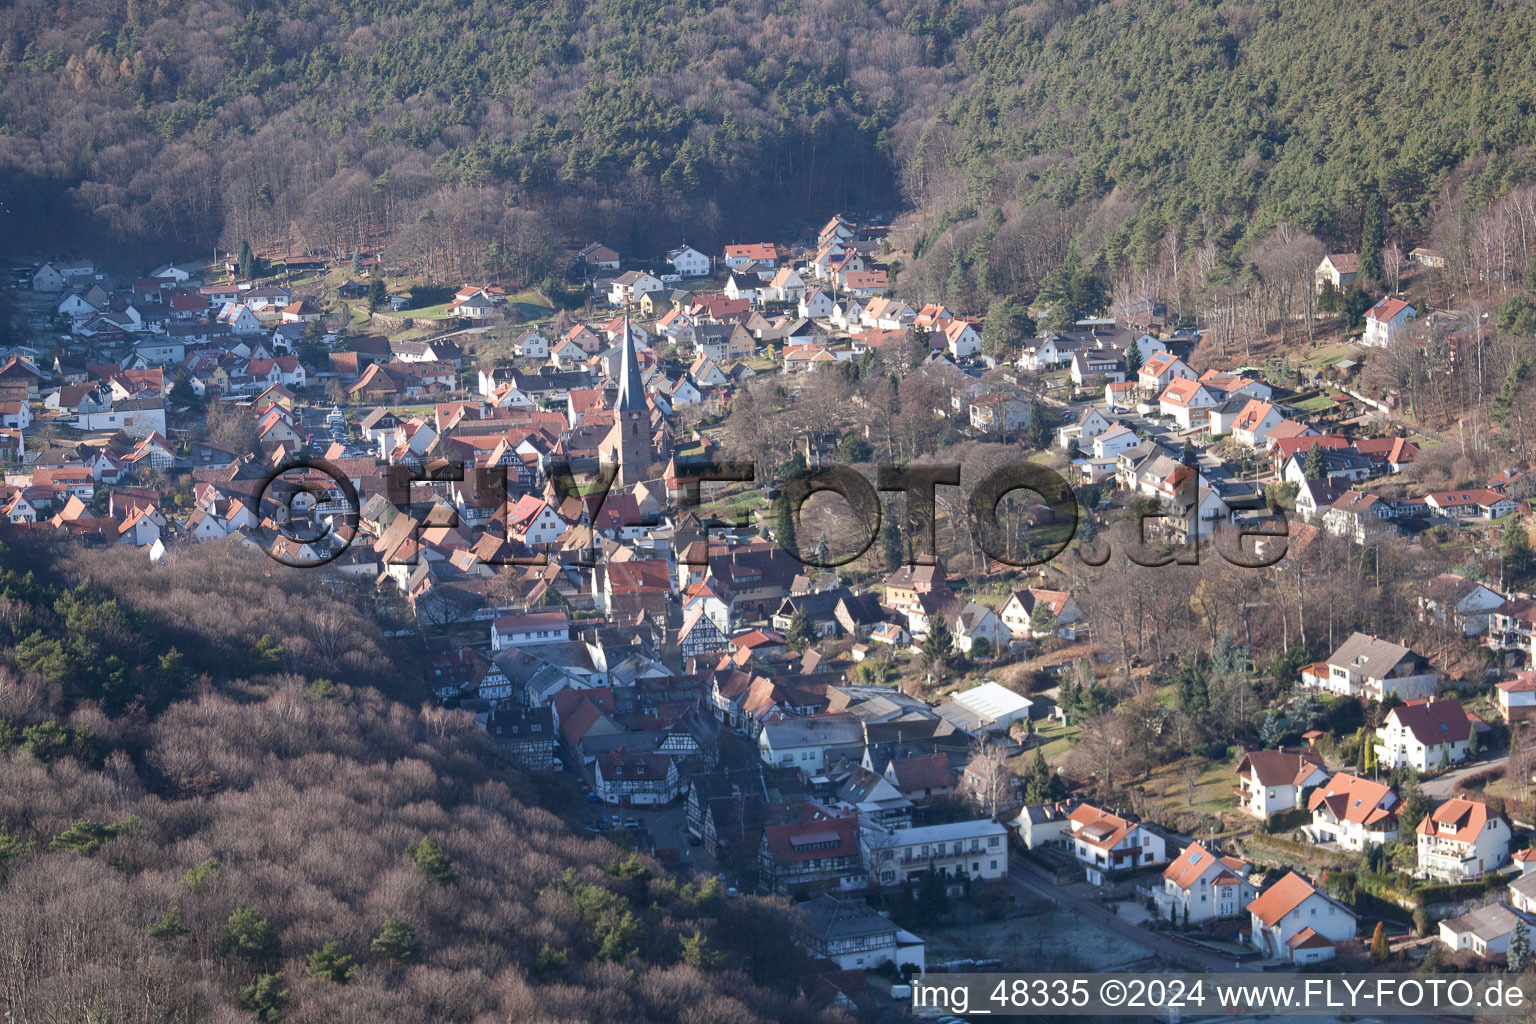 Aerial photograpy of Forest and mountain scenery des suedlichen Pfaelzerwald in Doerrenbach in the state Rhineland-Palatinate